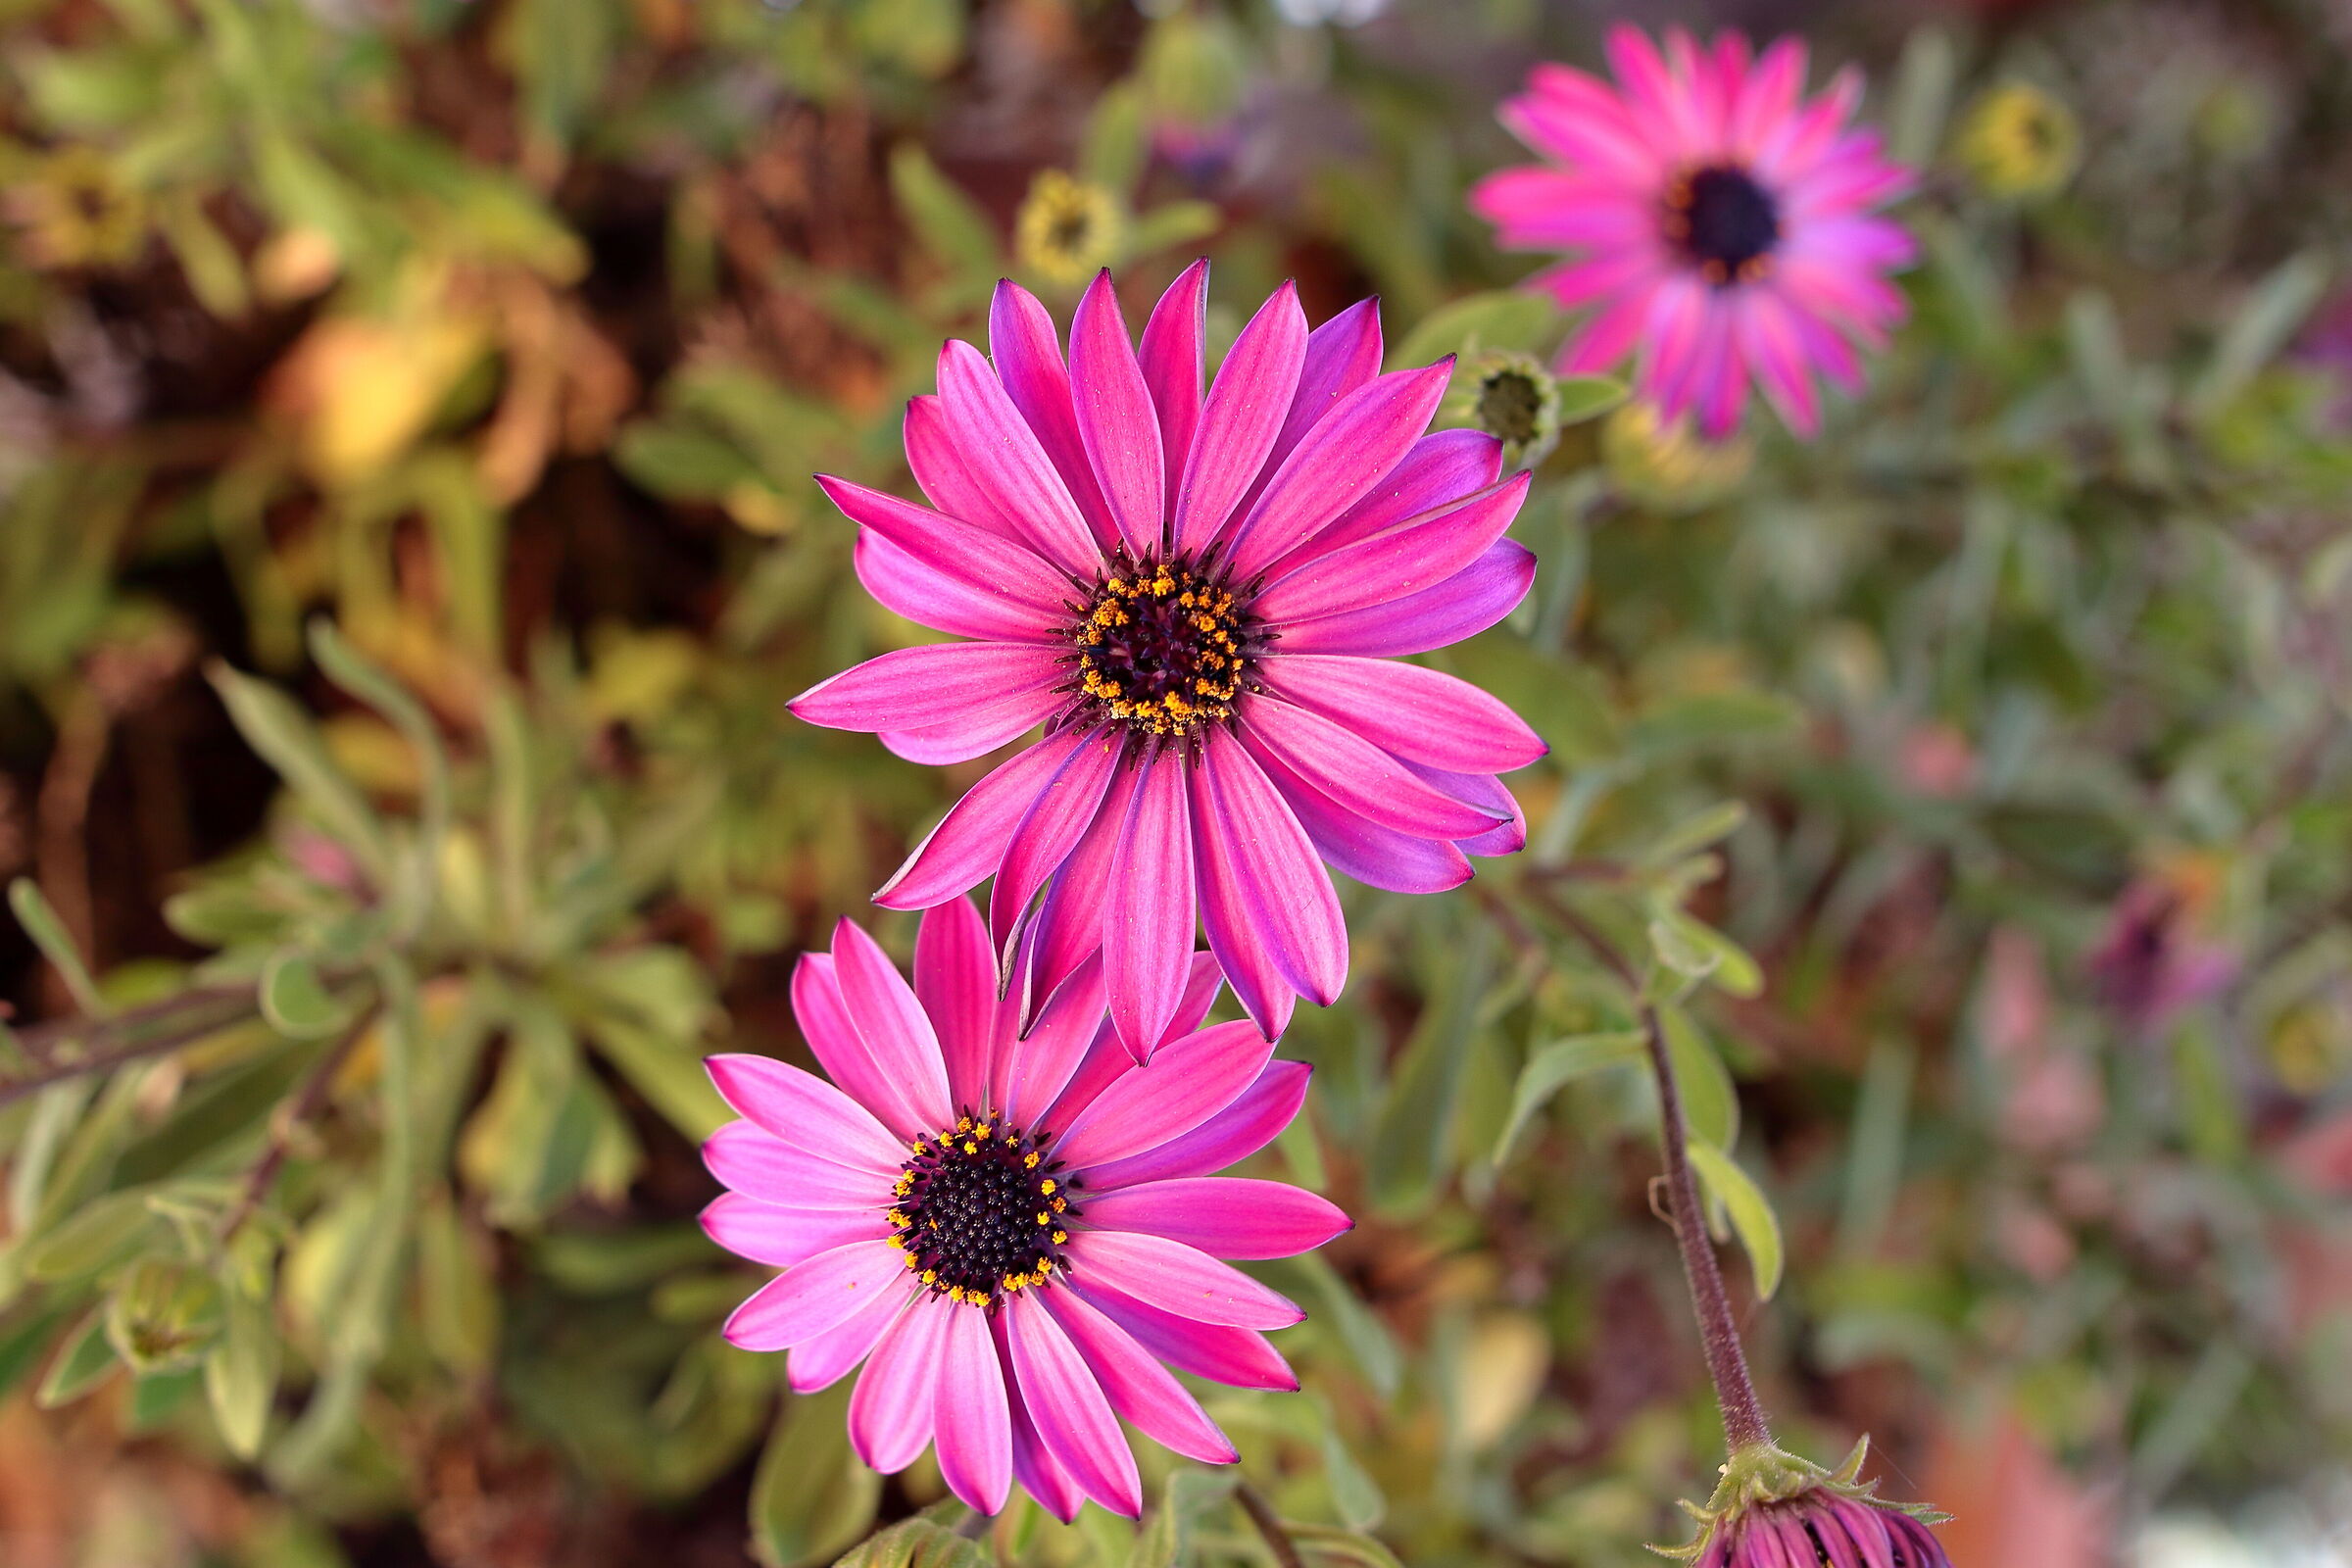 These African daisies are becoming more and more beautiful...